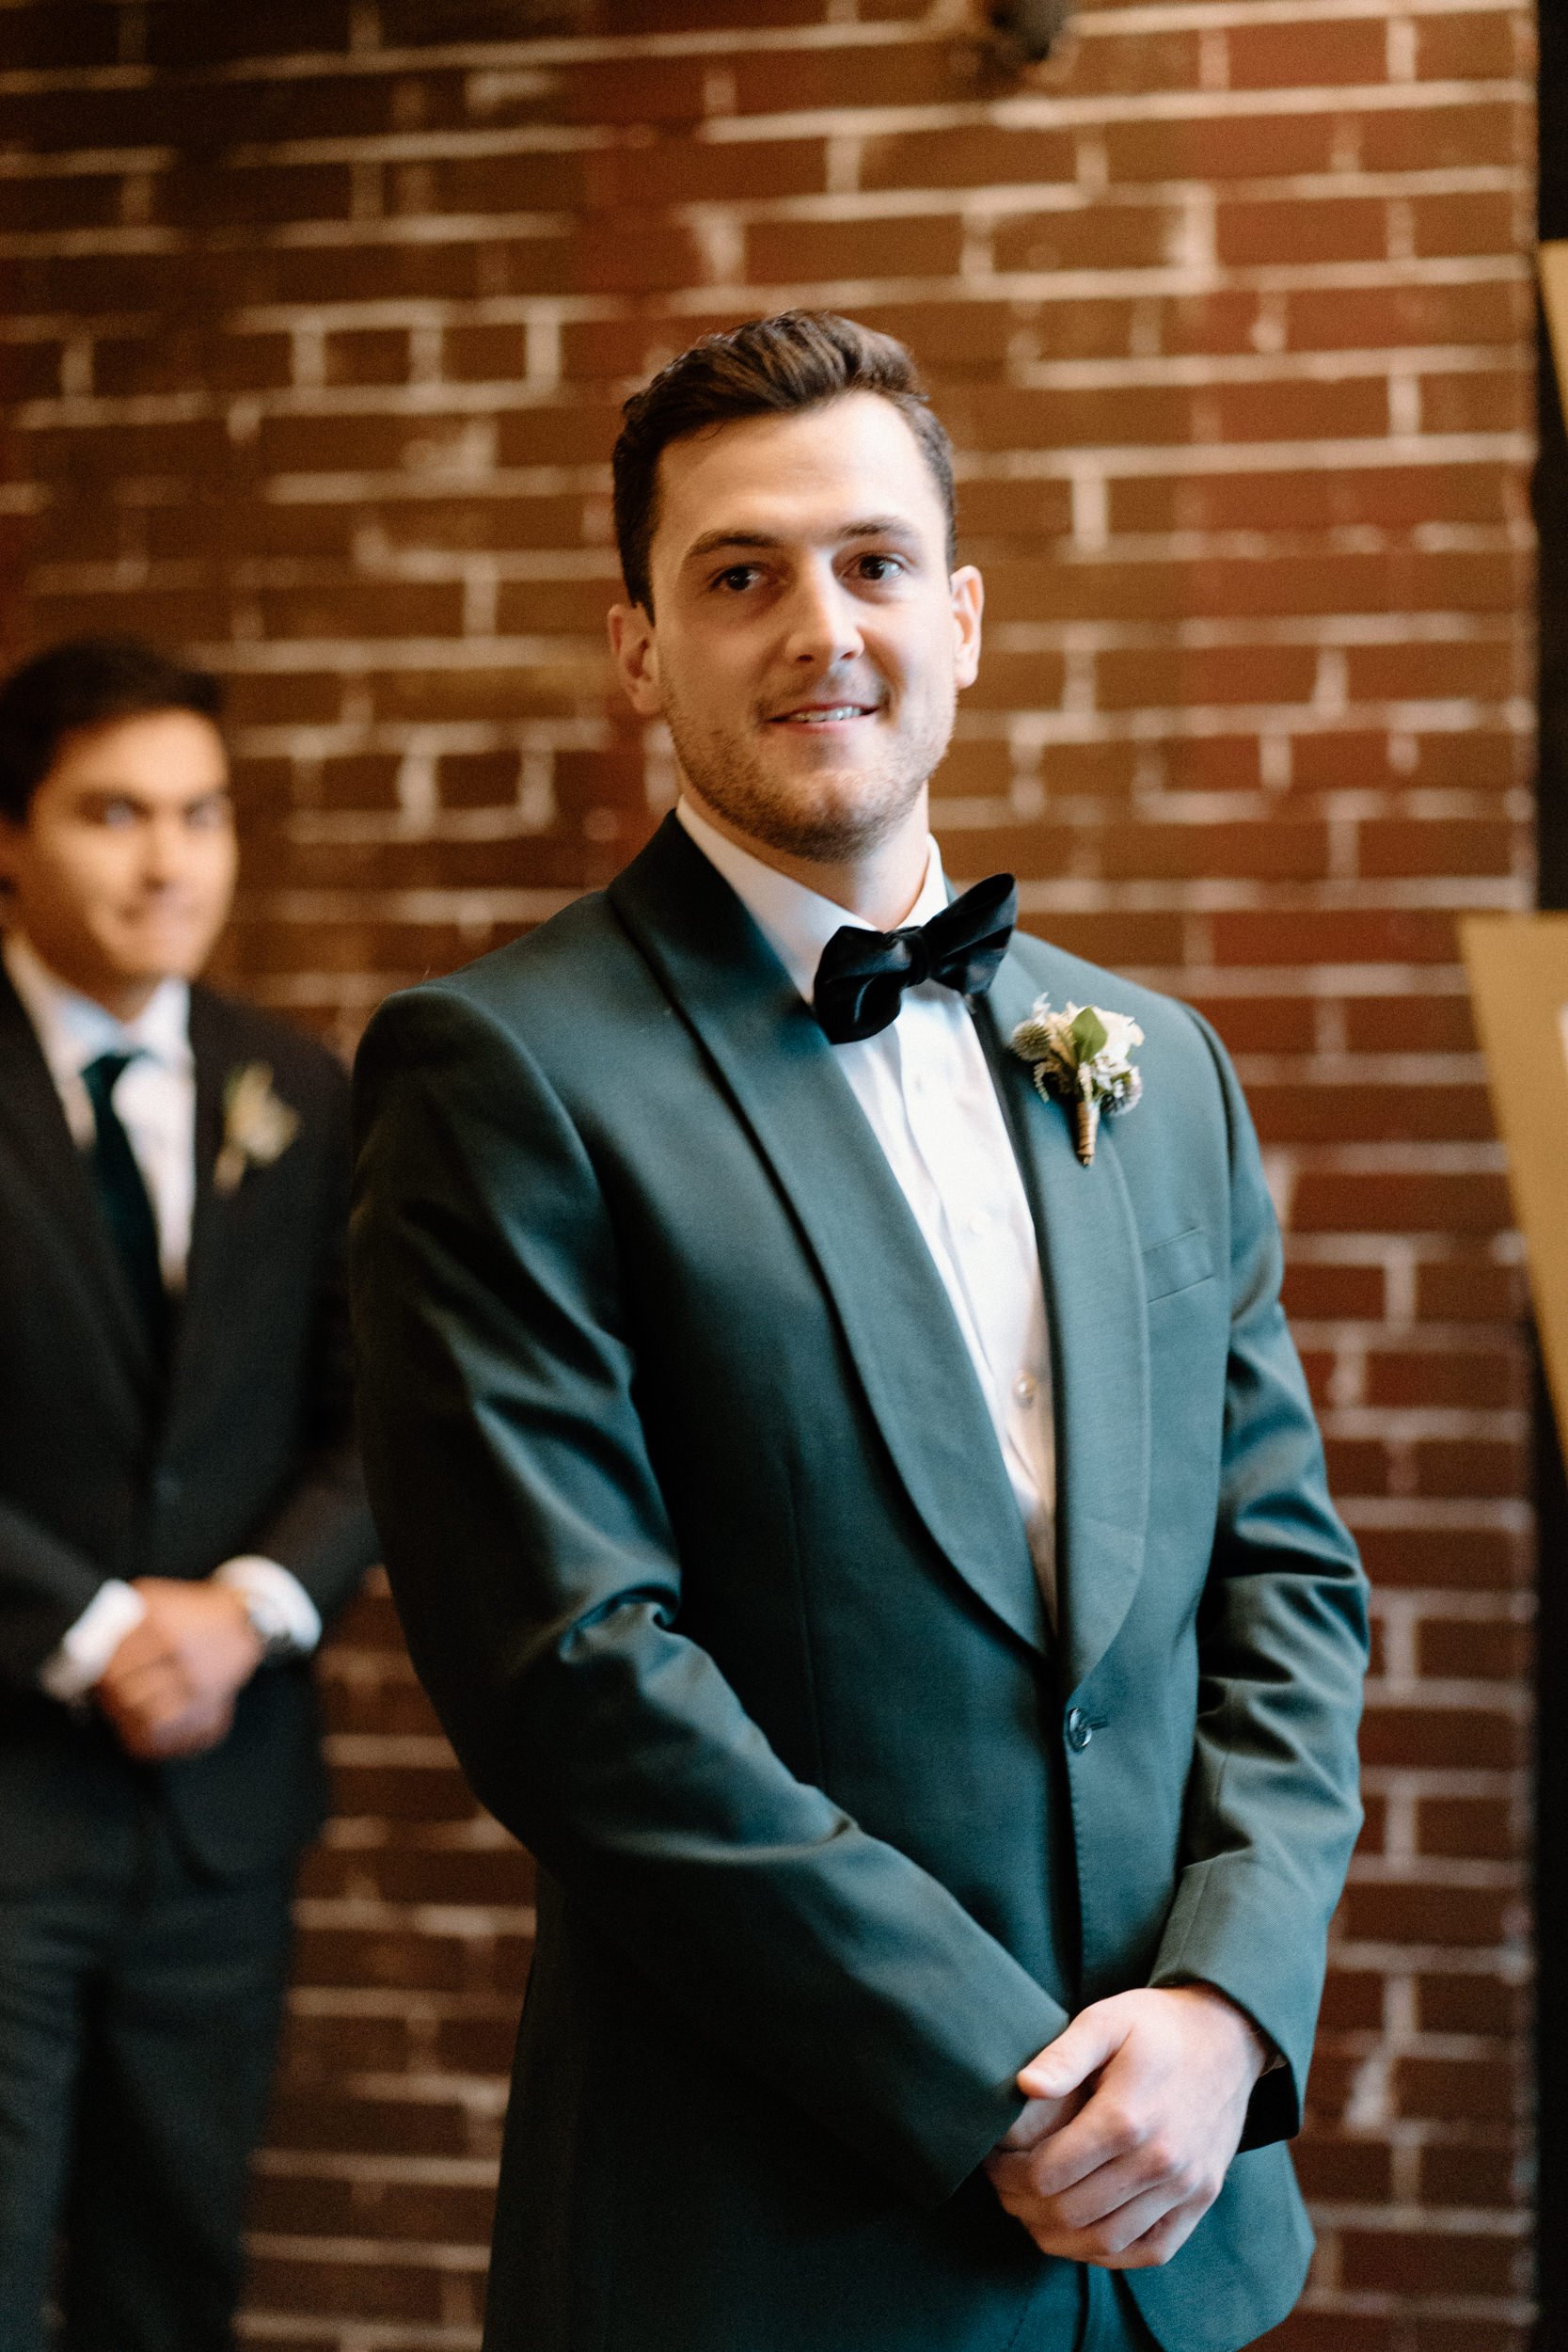 The groom smiles as he watches the bride walk down the aisle toward him